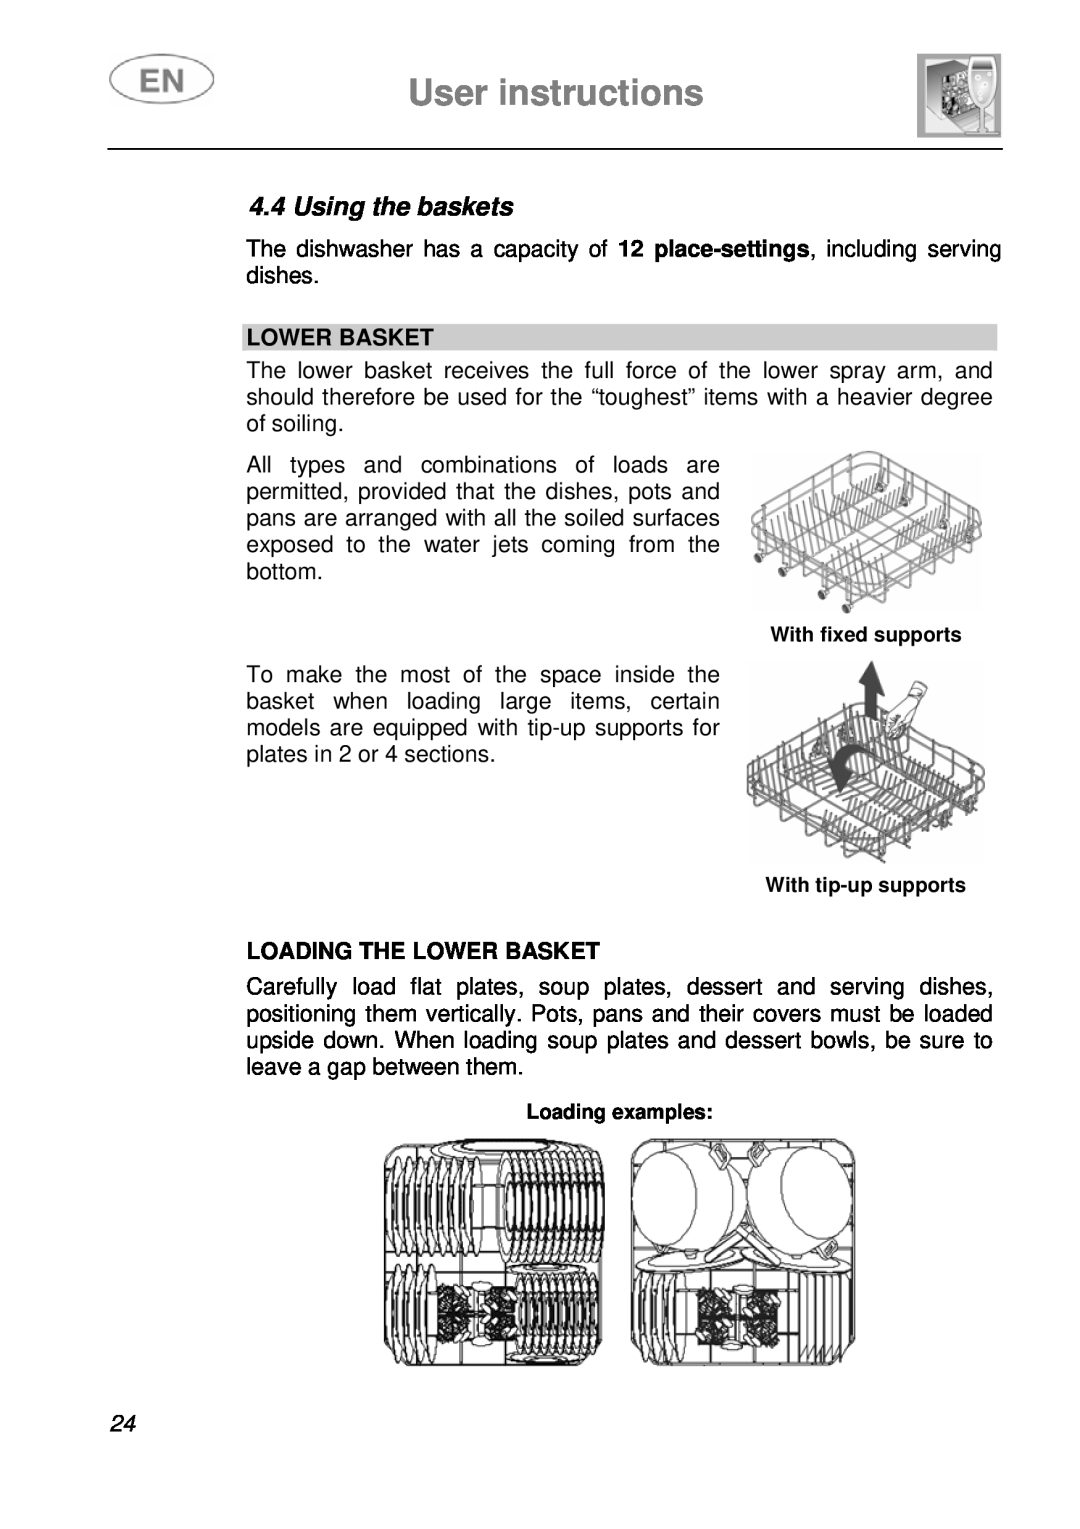 Smeg DI612A1 instruction manual User instructions, Using the baskets, Loading The Lower Basket 